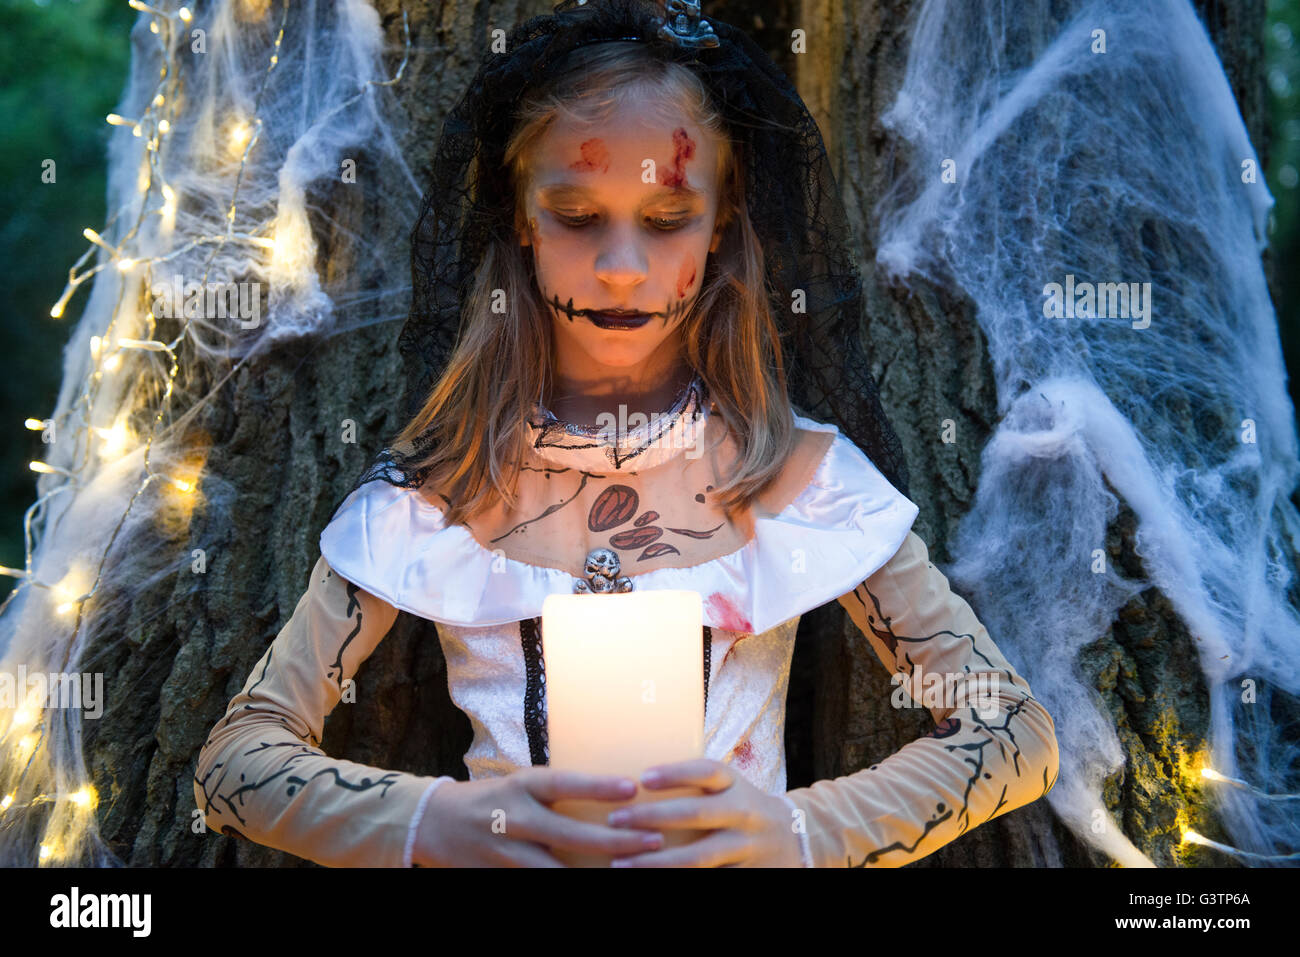 A child dressed in costume for Halloween Night. Stock Photo